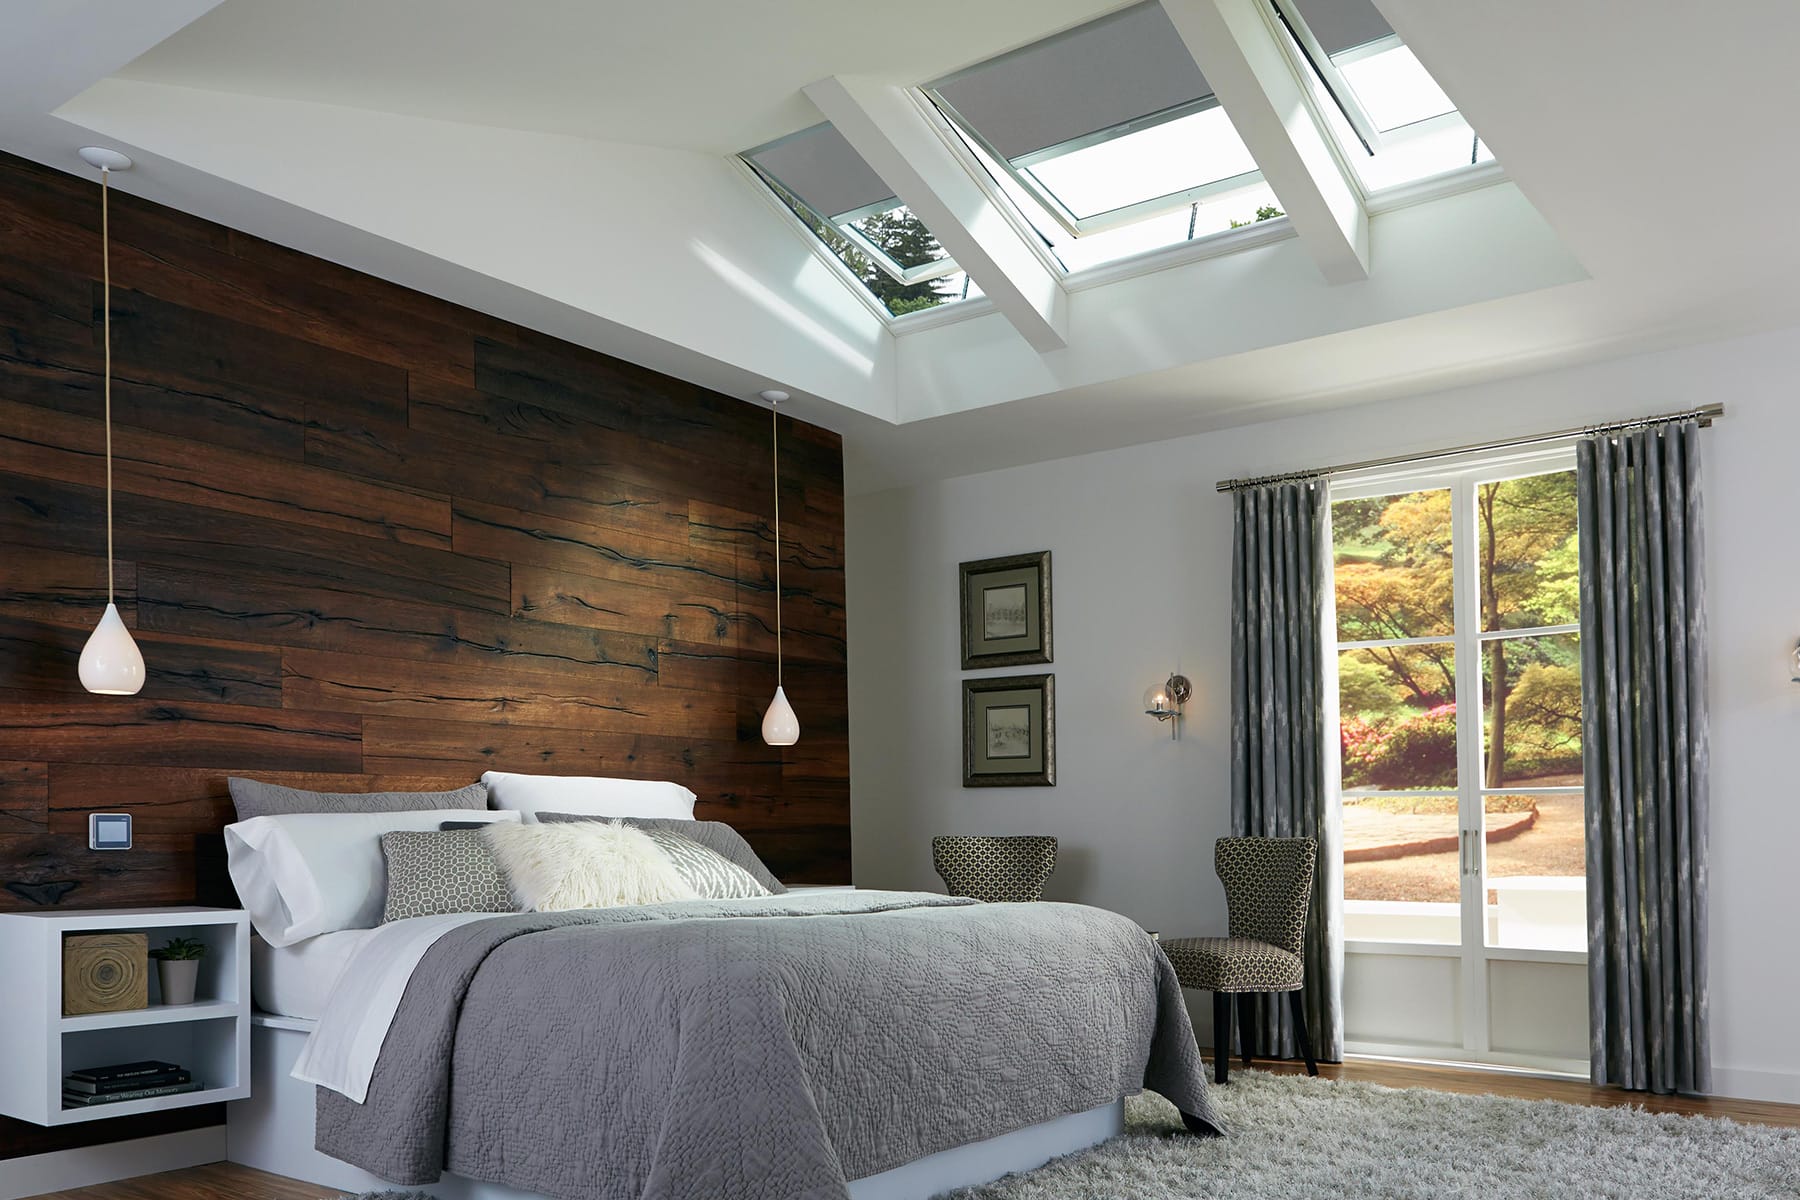  Bedroom  Skylight with Blinds Lighting Control and Privacy